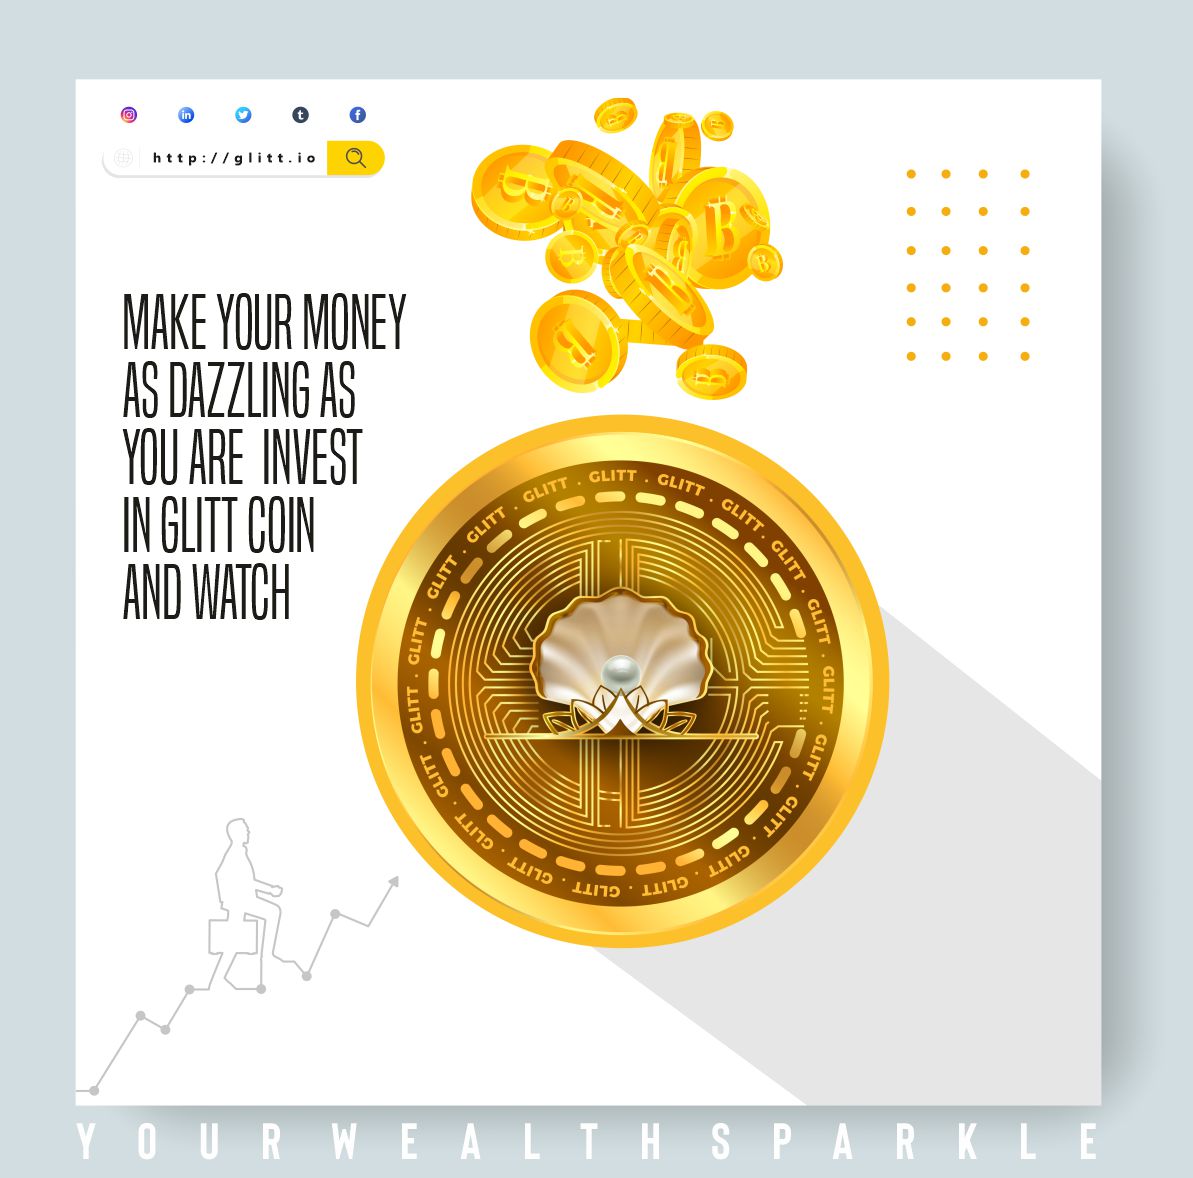 🌟✨ Make your money as dazzling as you are! Invest in Glitt Coin and watch your wealth sparkle. 💎💸

🌈 Overcome barriers! Discover the brilliance of Glitt Coin for your riches! 🏆

Join us today: glitt.io

#crypto #glittcoin #cryptogoals #easytrading #ethereum